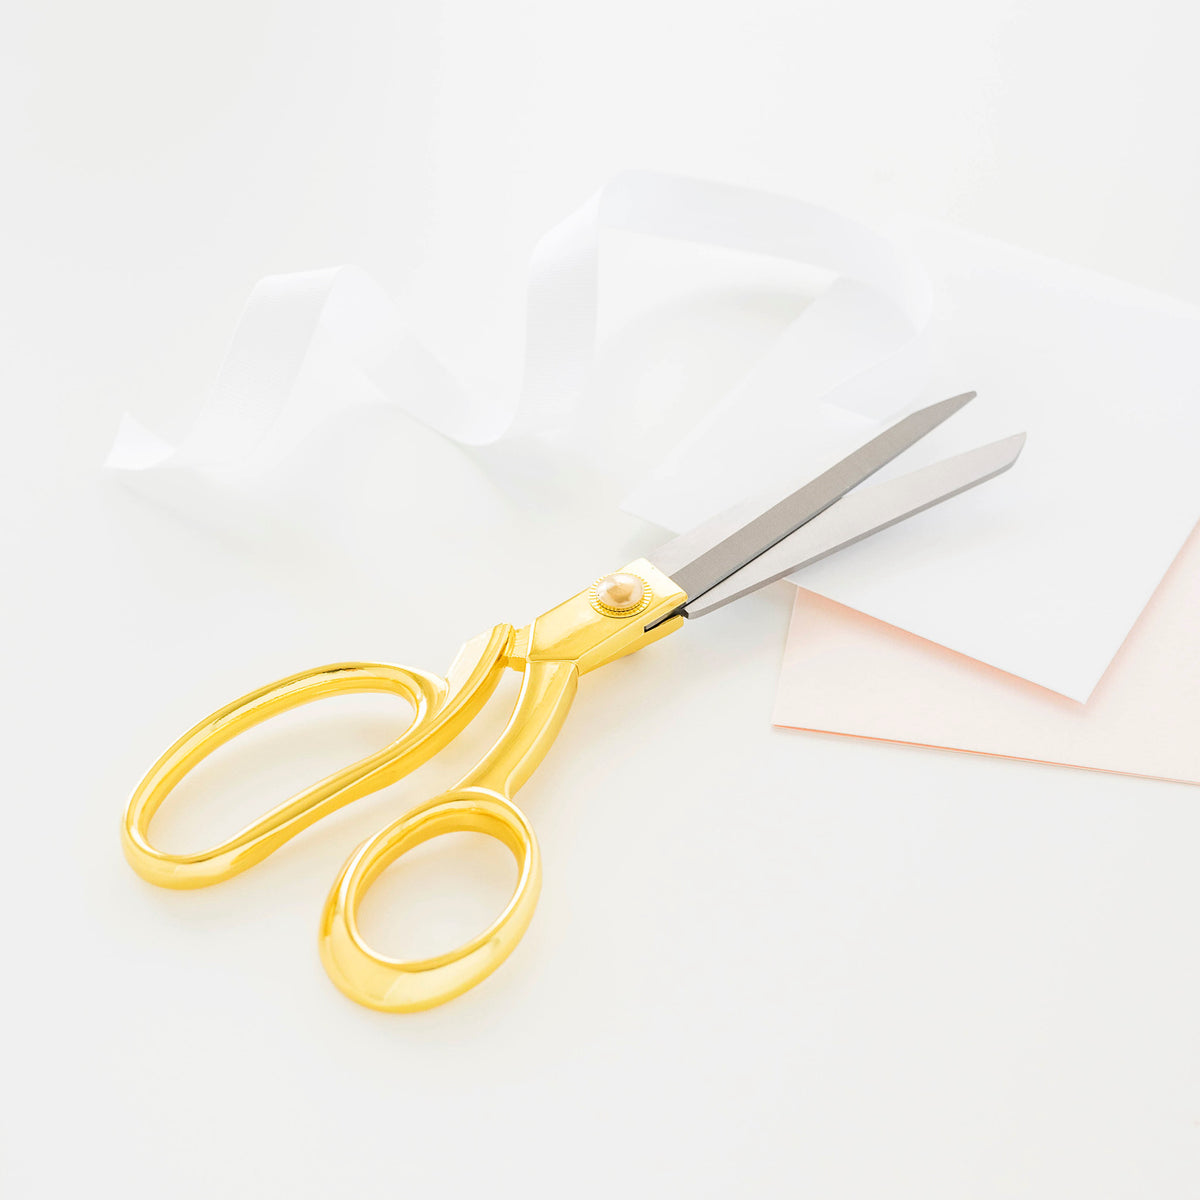 gold handled scissors with loose paper and ribbon